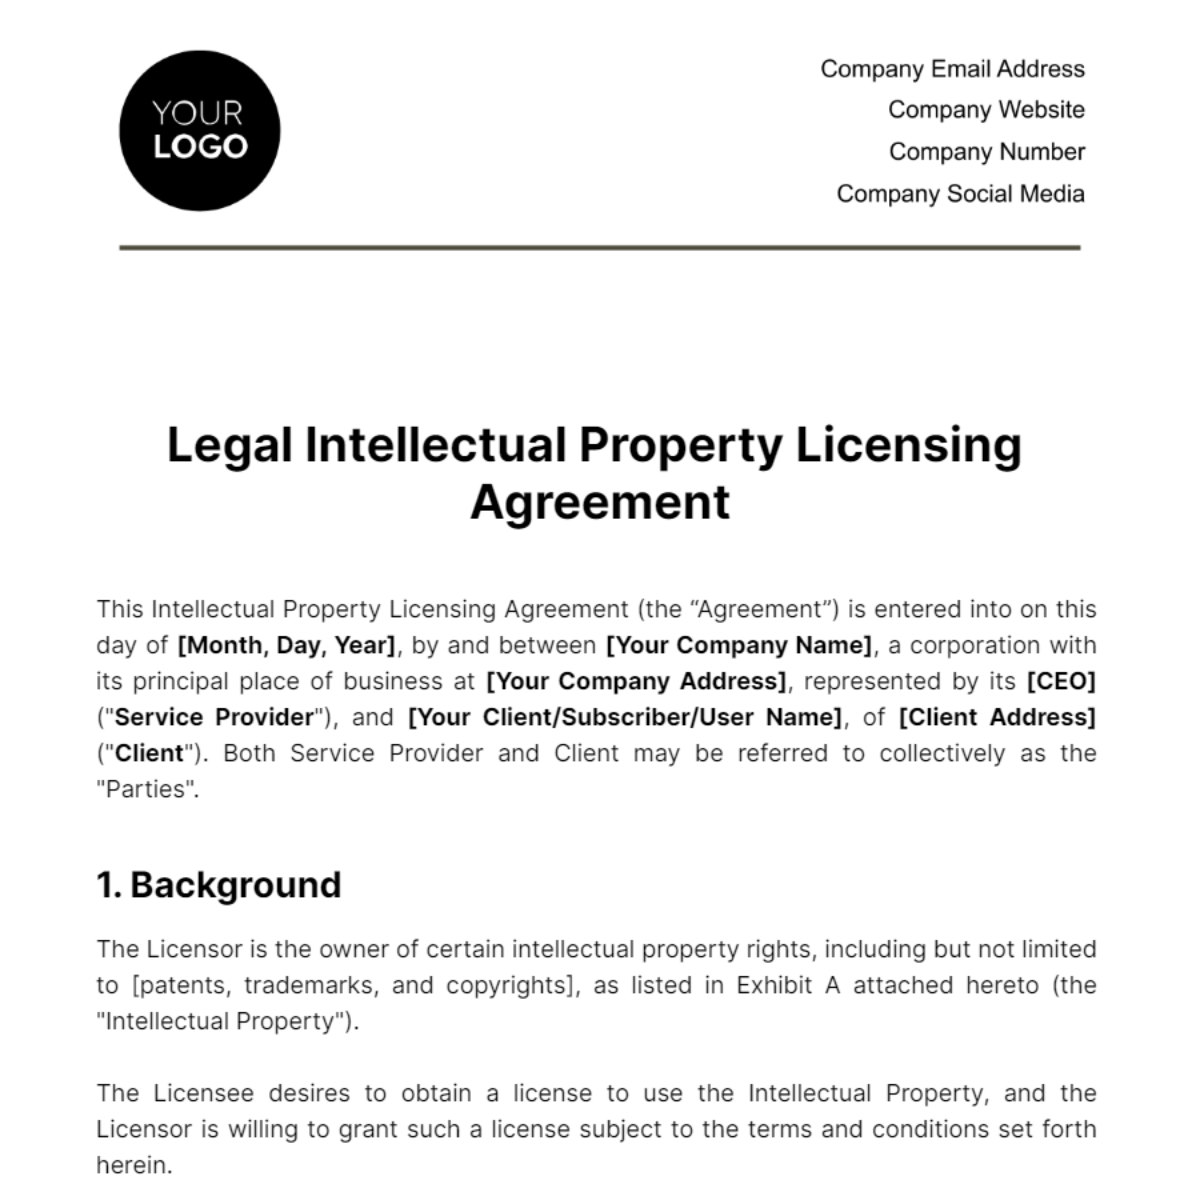 Free Legal Intellectual Property Licensing Agreement Template